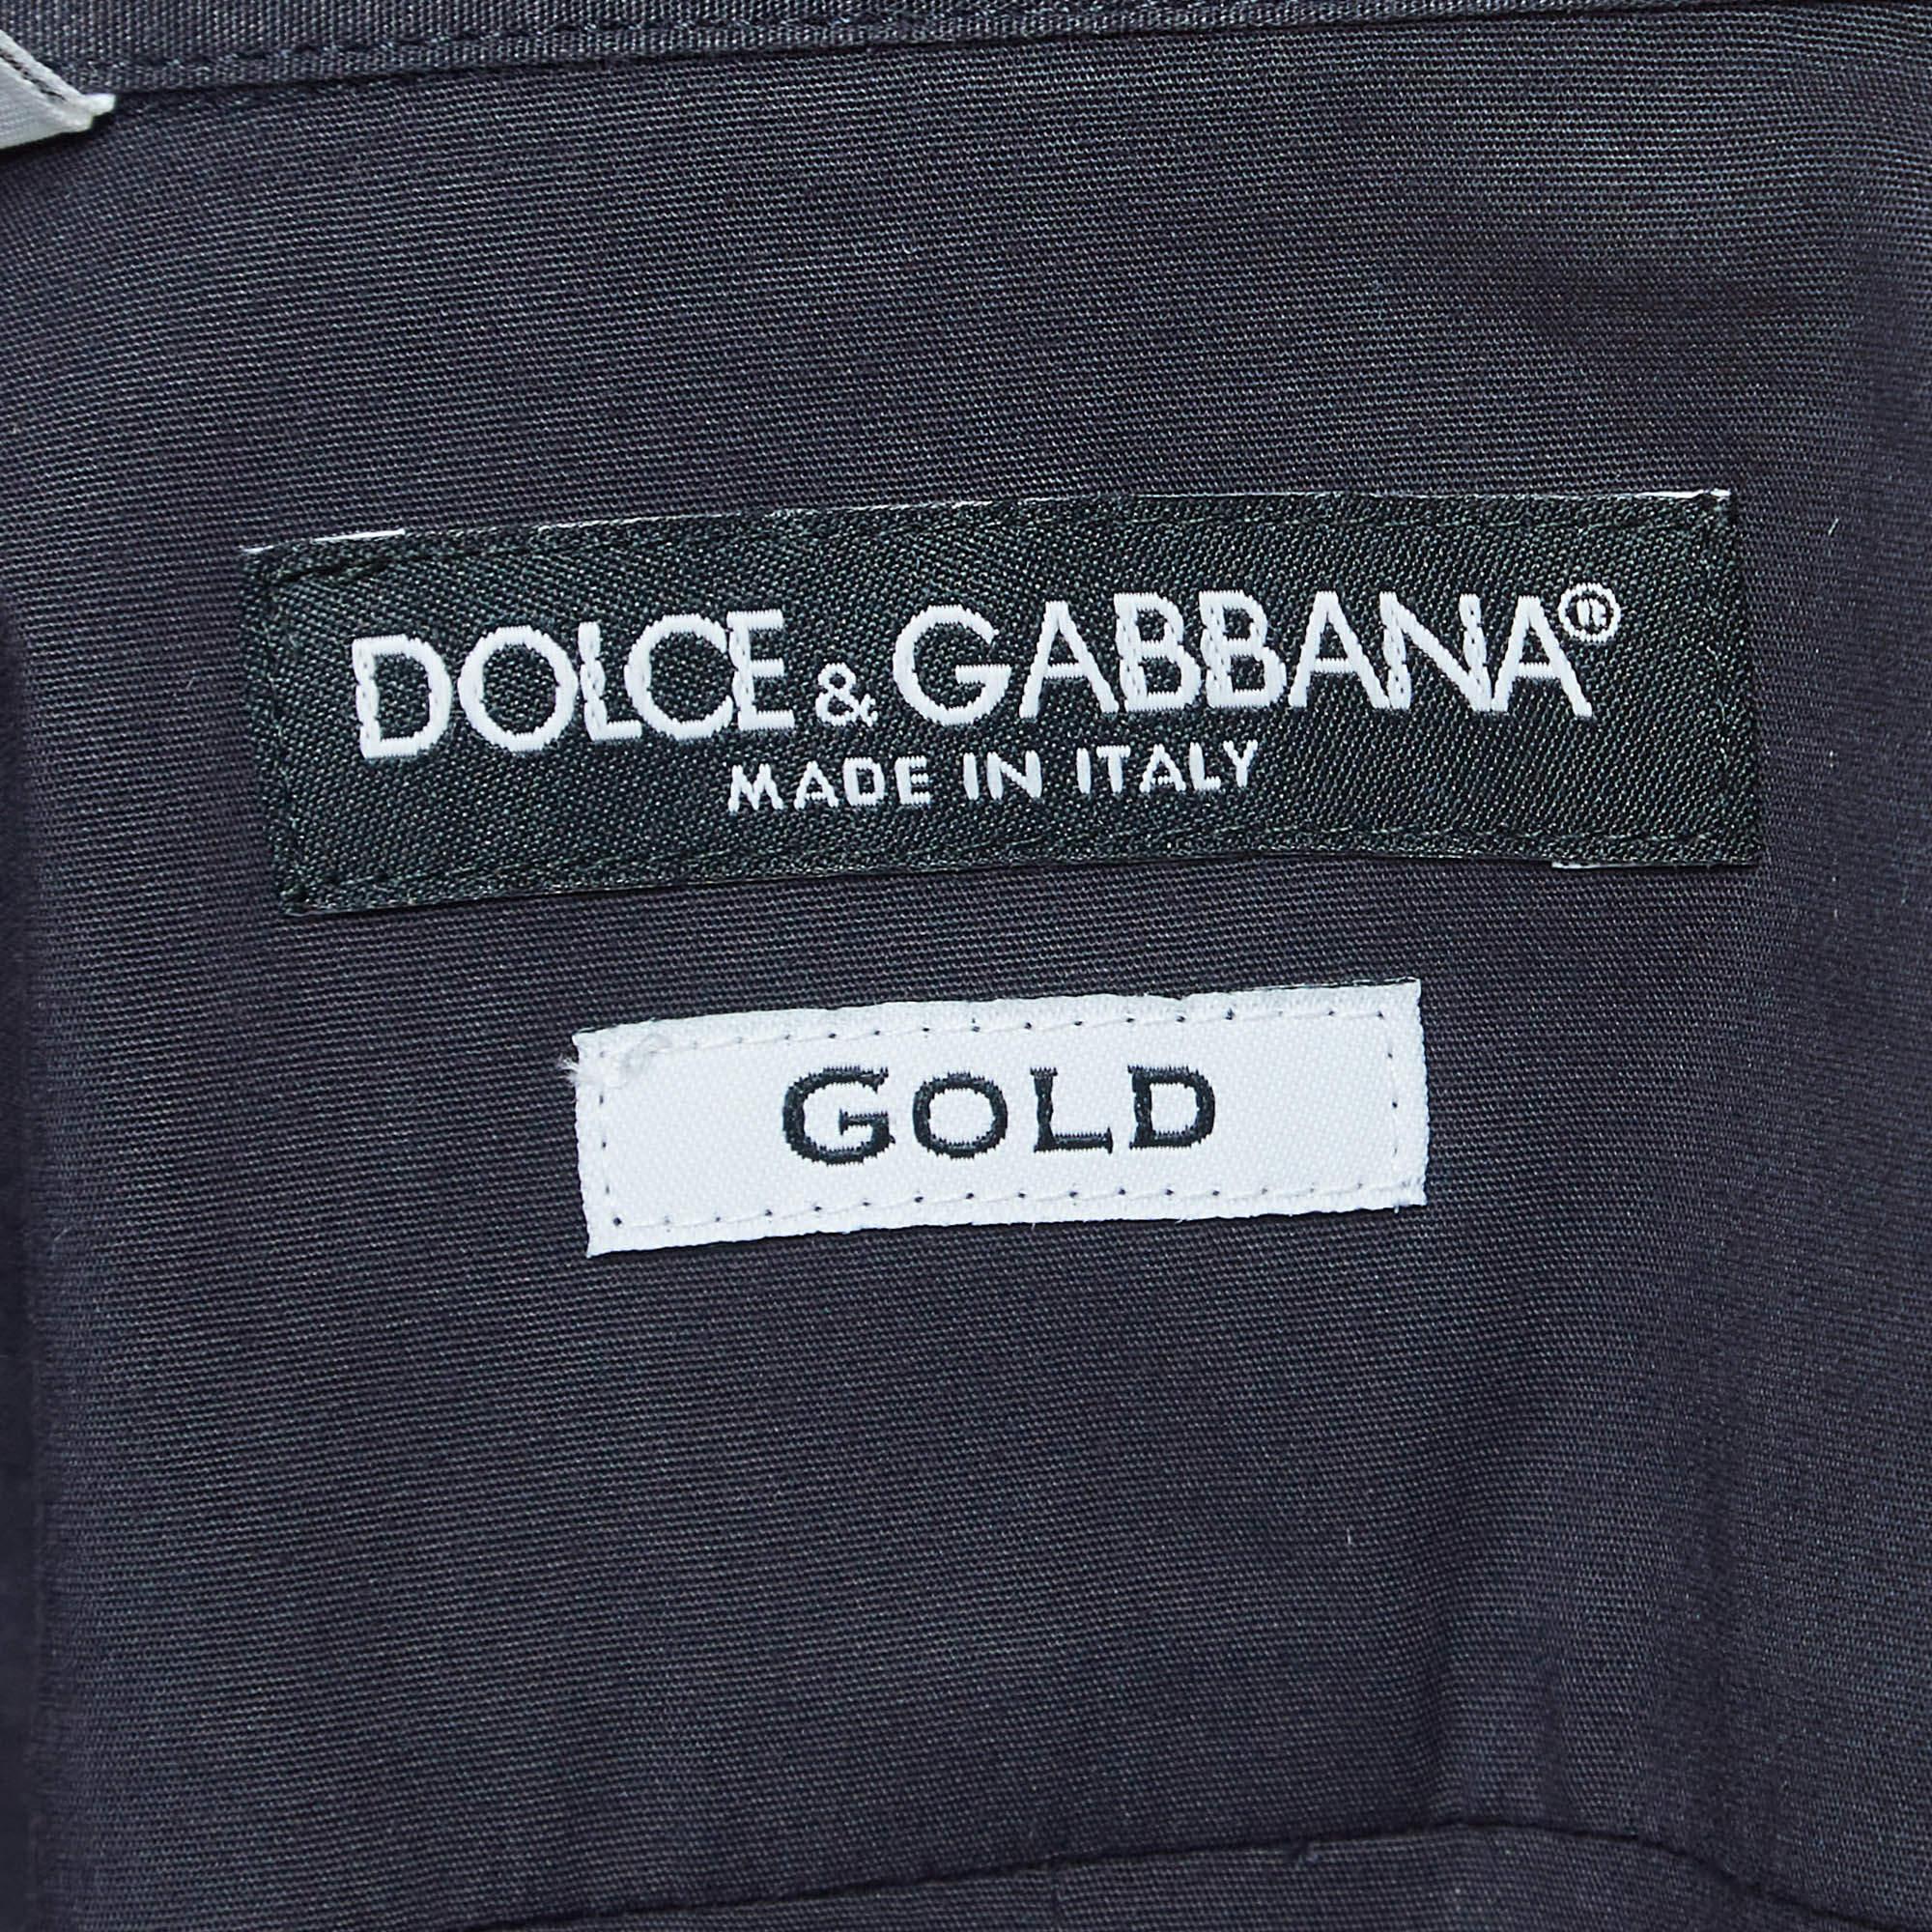 Dolce & Gabbana Gold Navy Blue Cotton Button Front Full Sleeve Shirt S In Excellent Condition For Sale In Dubai, Al Qouz 2